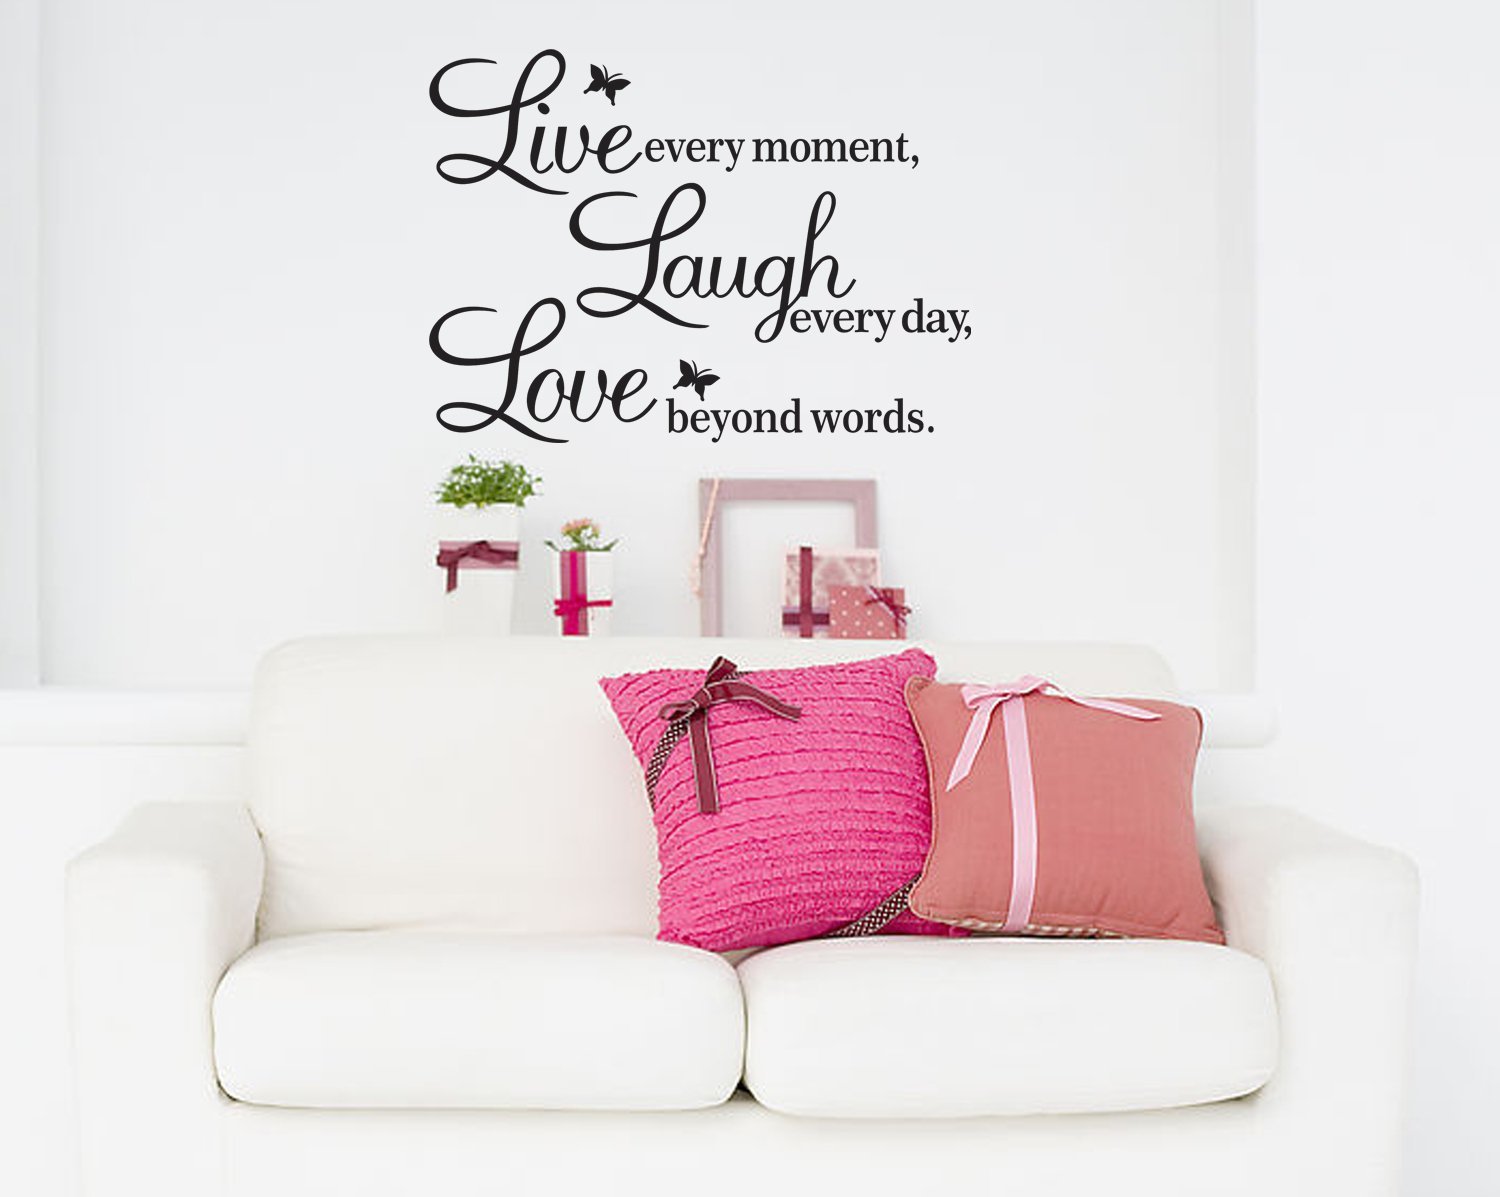 Wall Decal Quotes S5Q DIY Live Laugh Love Quote Vinyl Decal Removable Art Wall Stickers Home Deco on Luulla